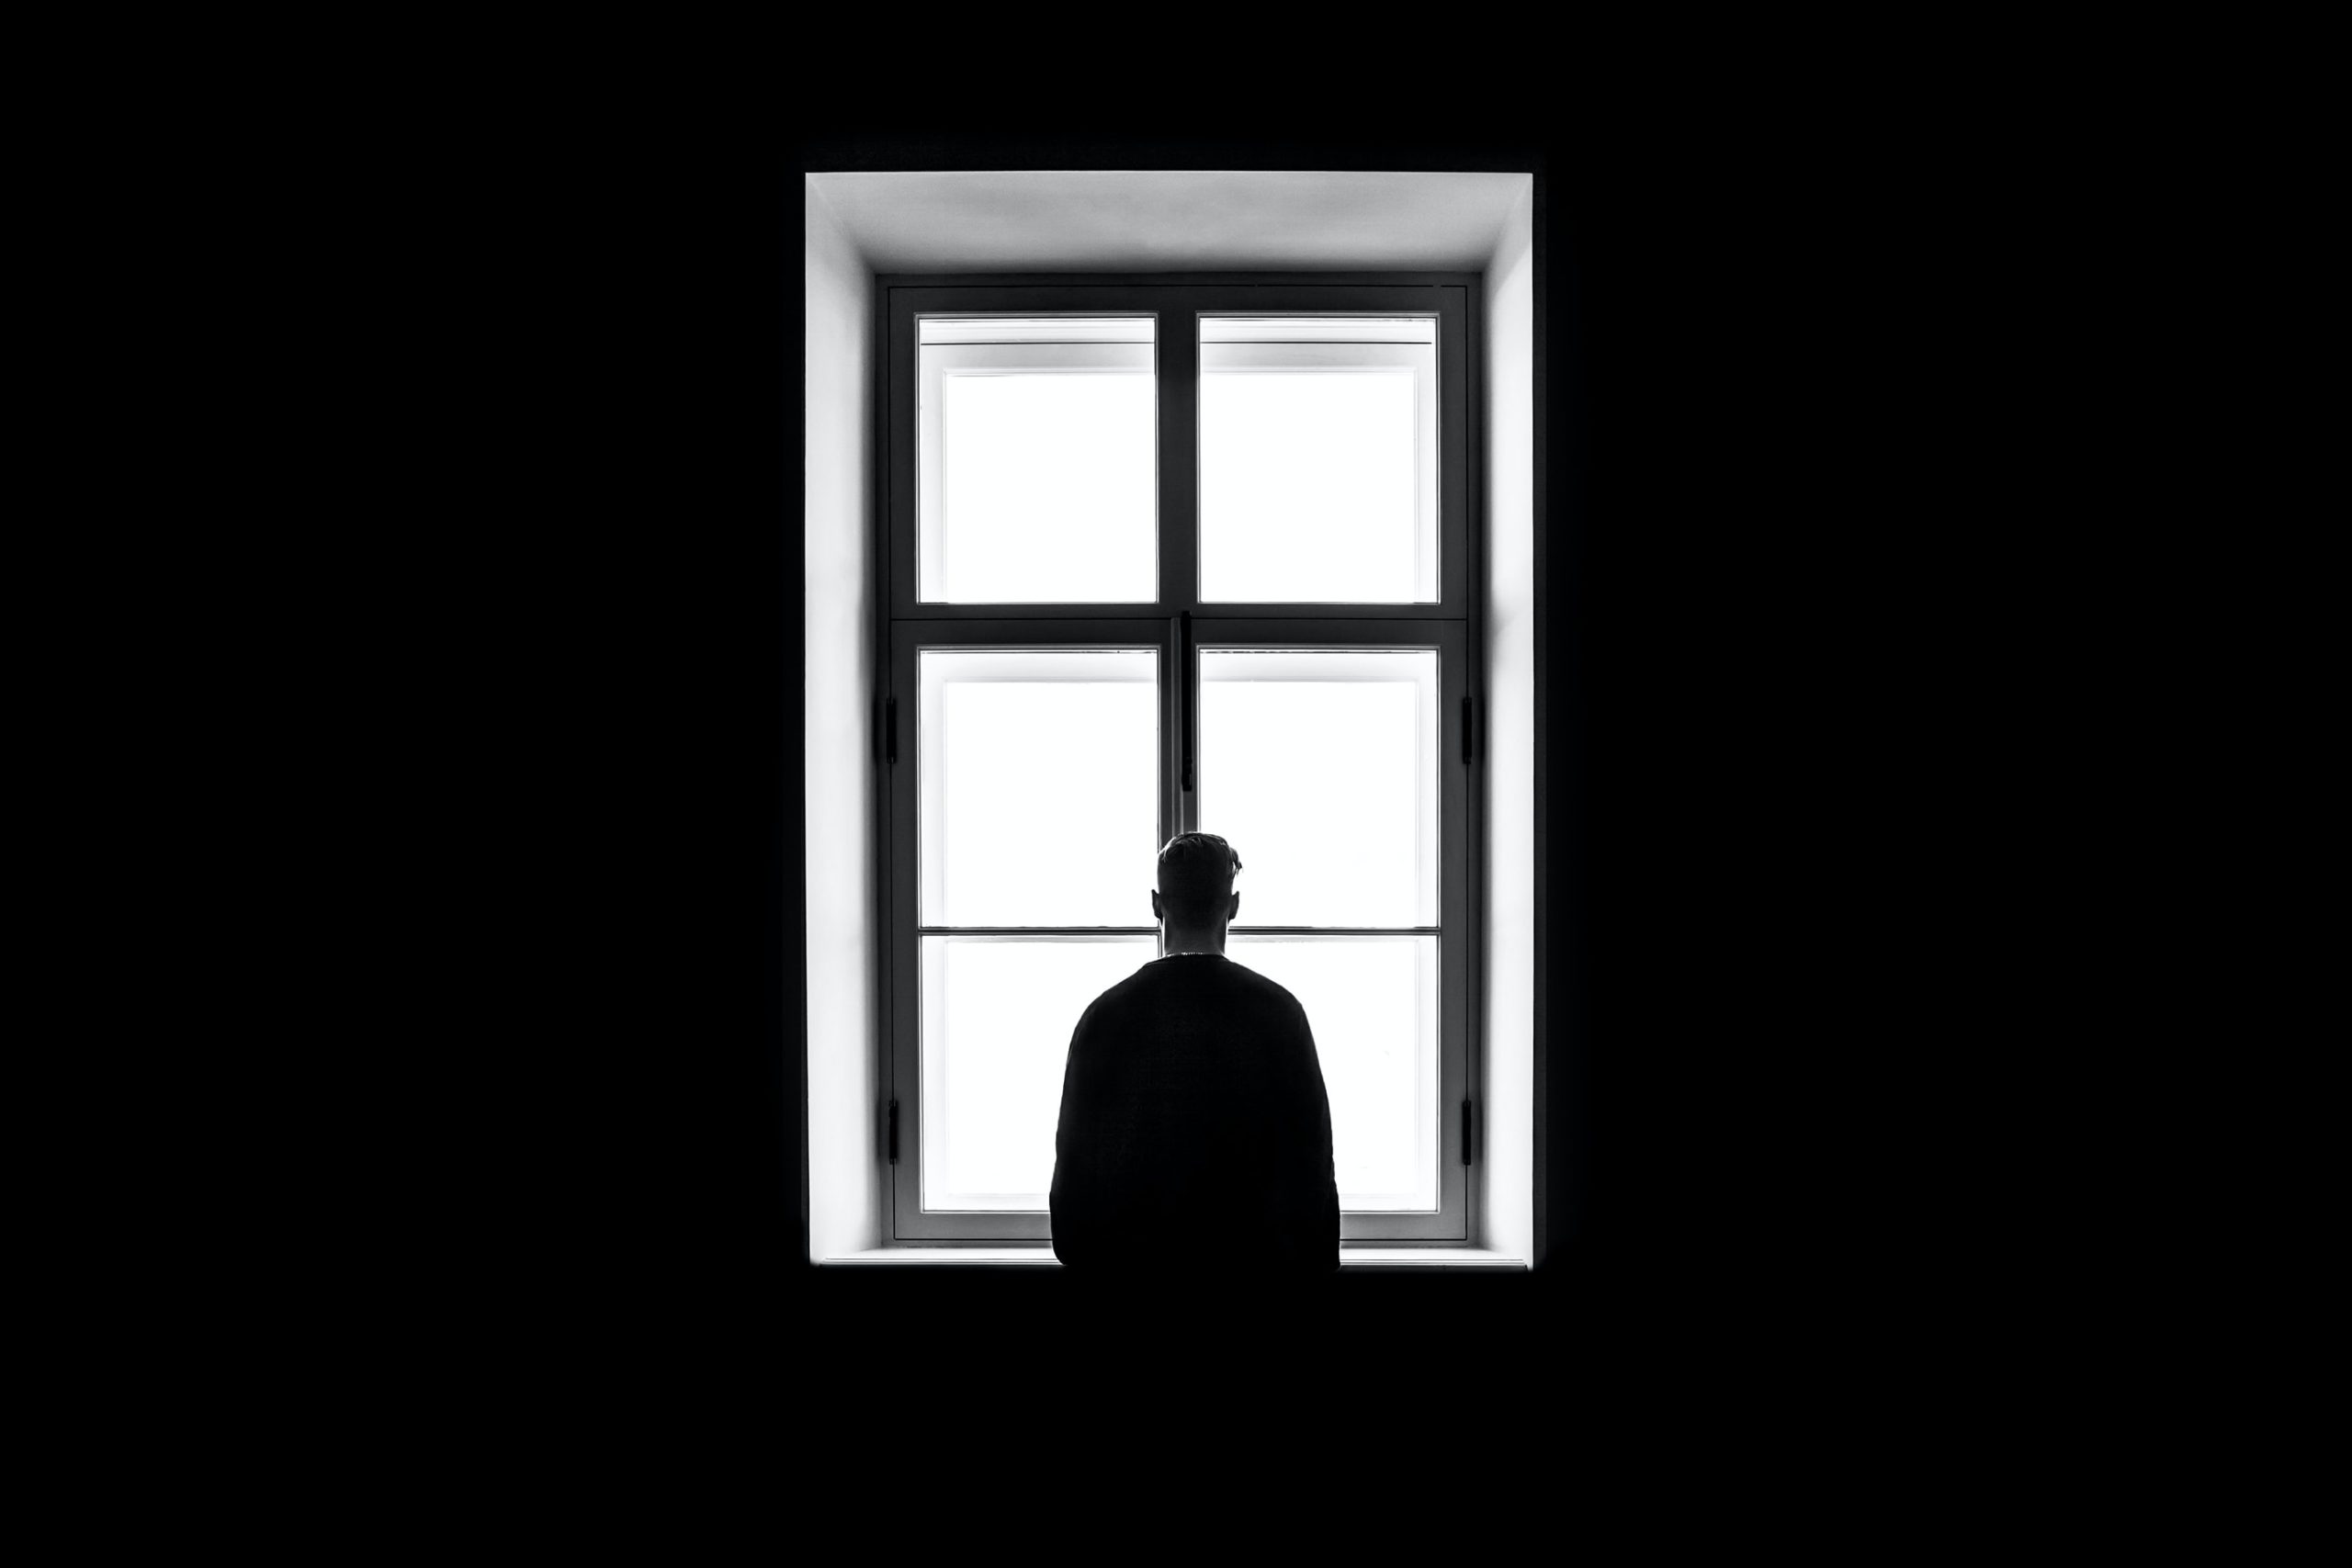 A man standing by a window